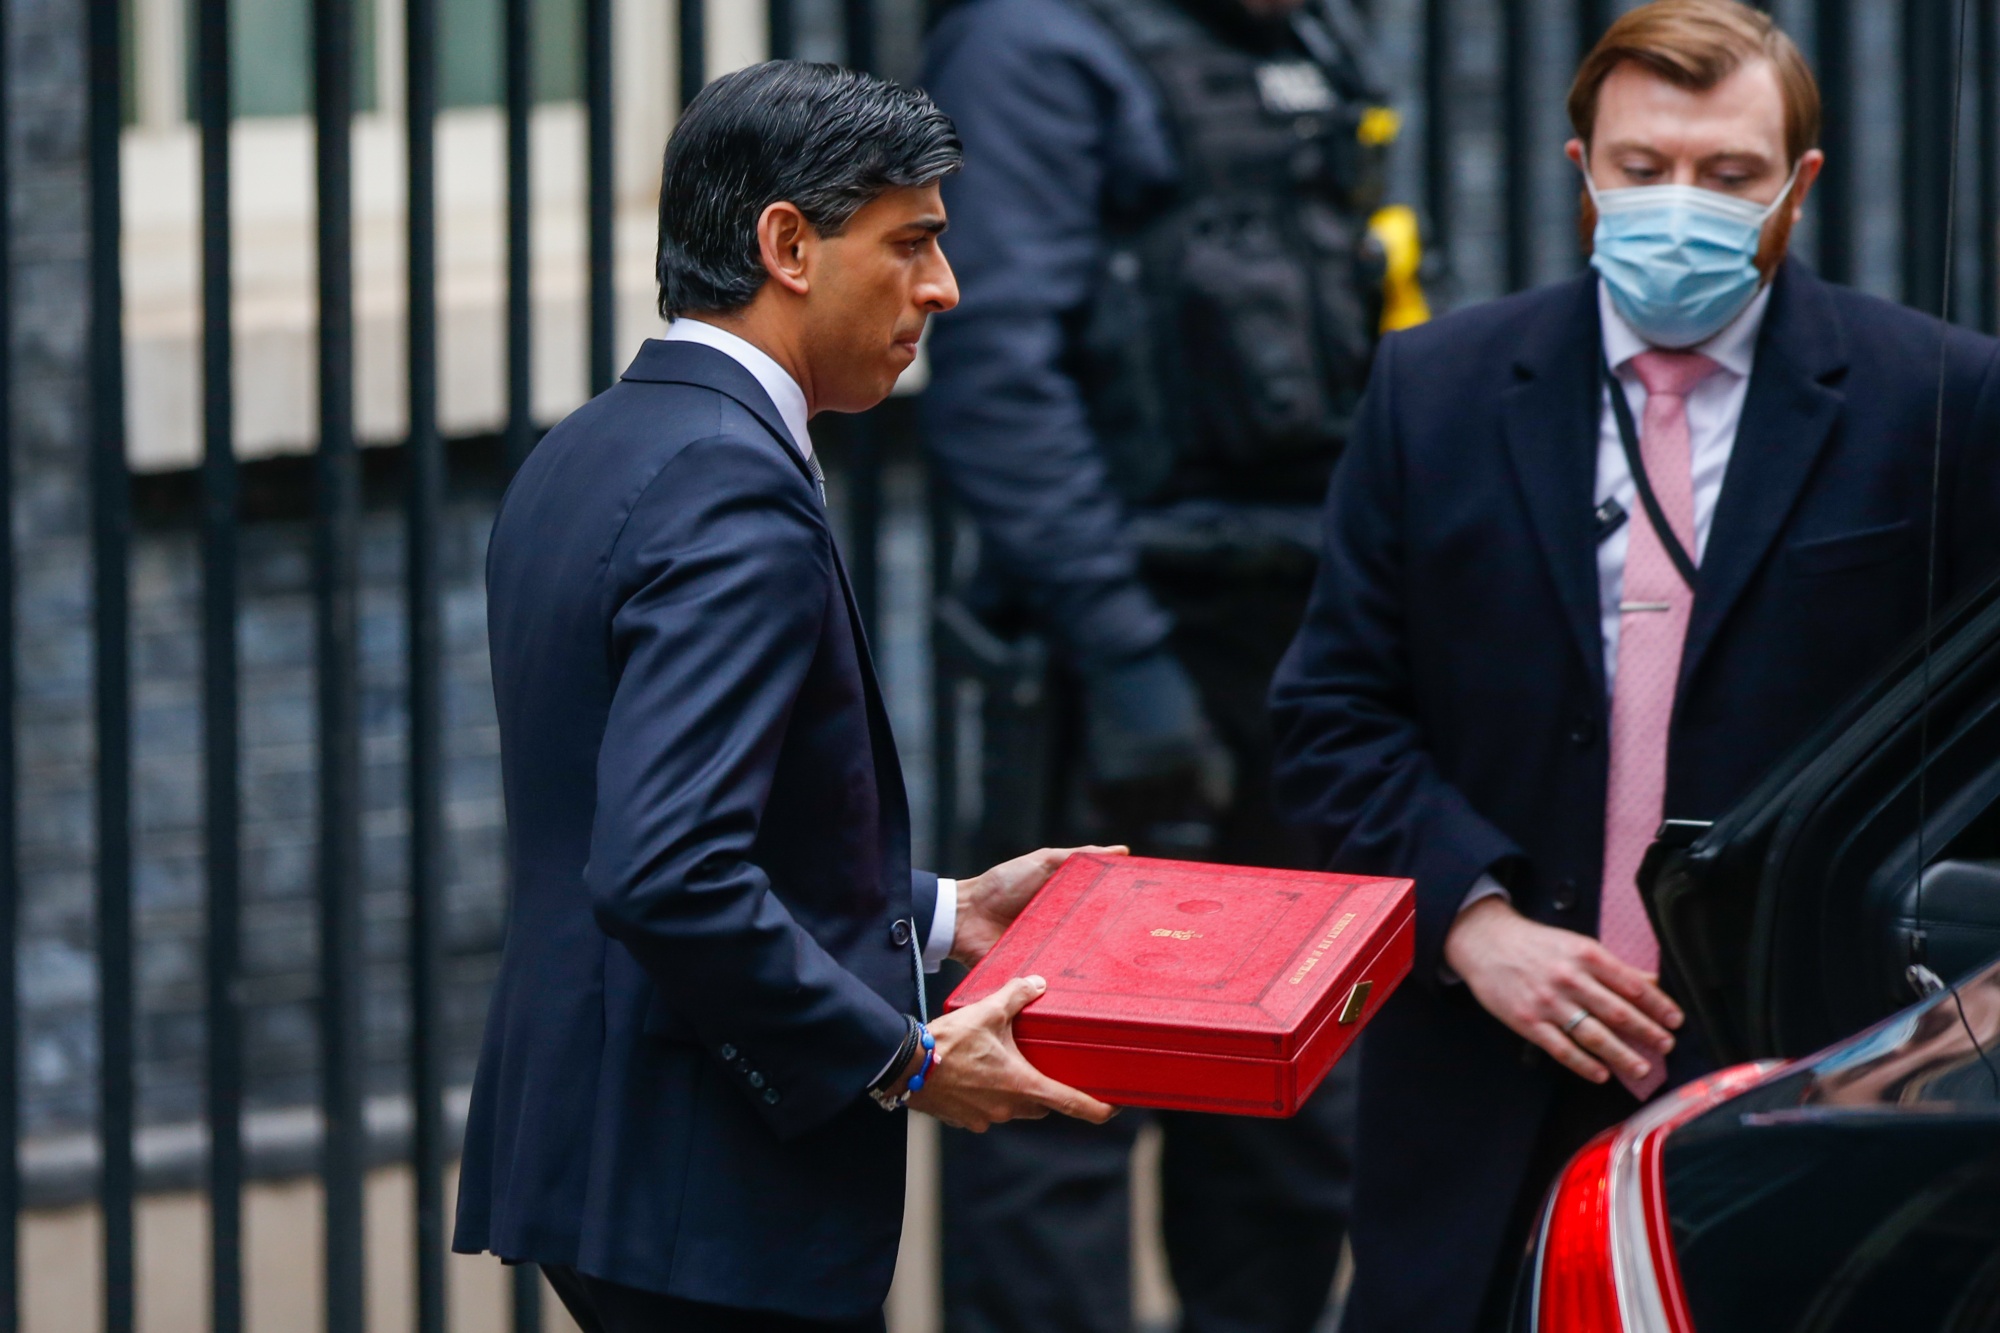 Rishi Sunak departs from number 11 Downing Street&nbsp;on his way to present the budget statement in Parliament in London, on&nbsp;March 3.&nbsp;